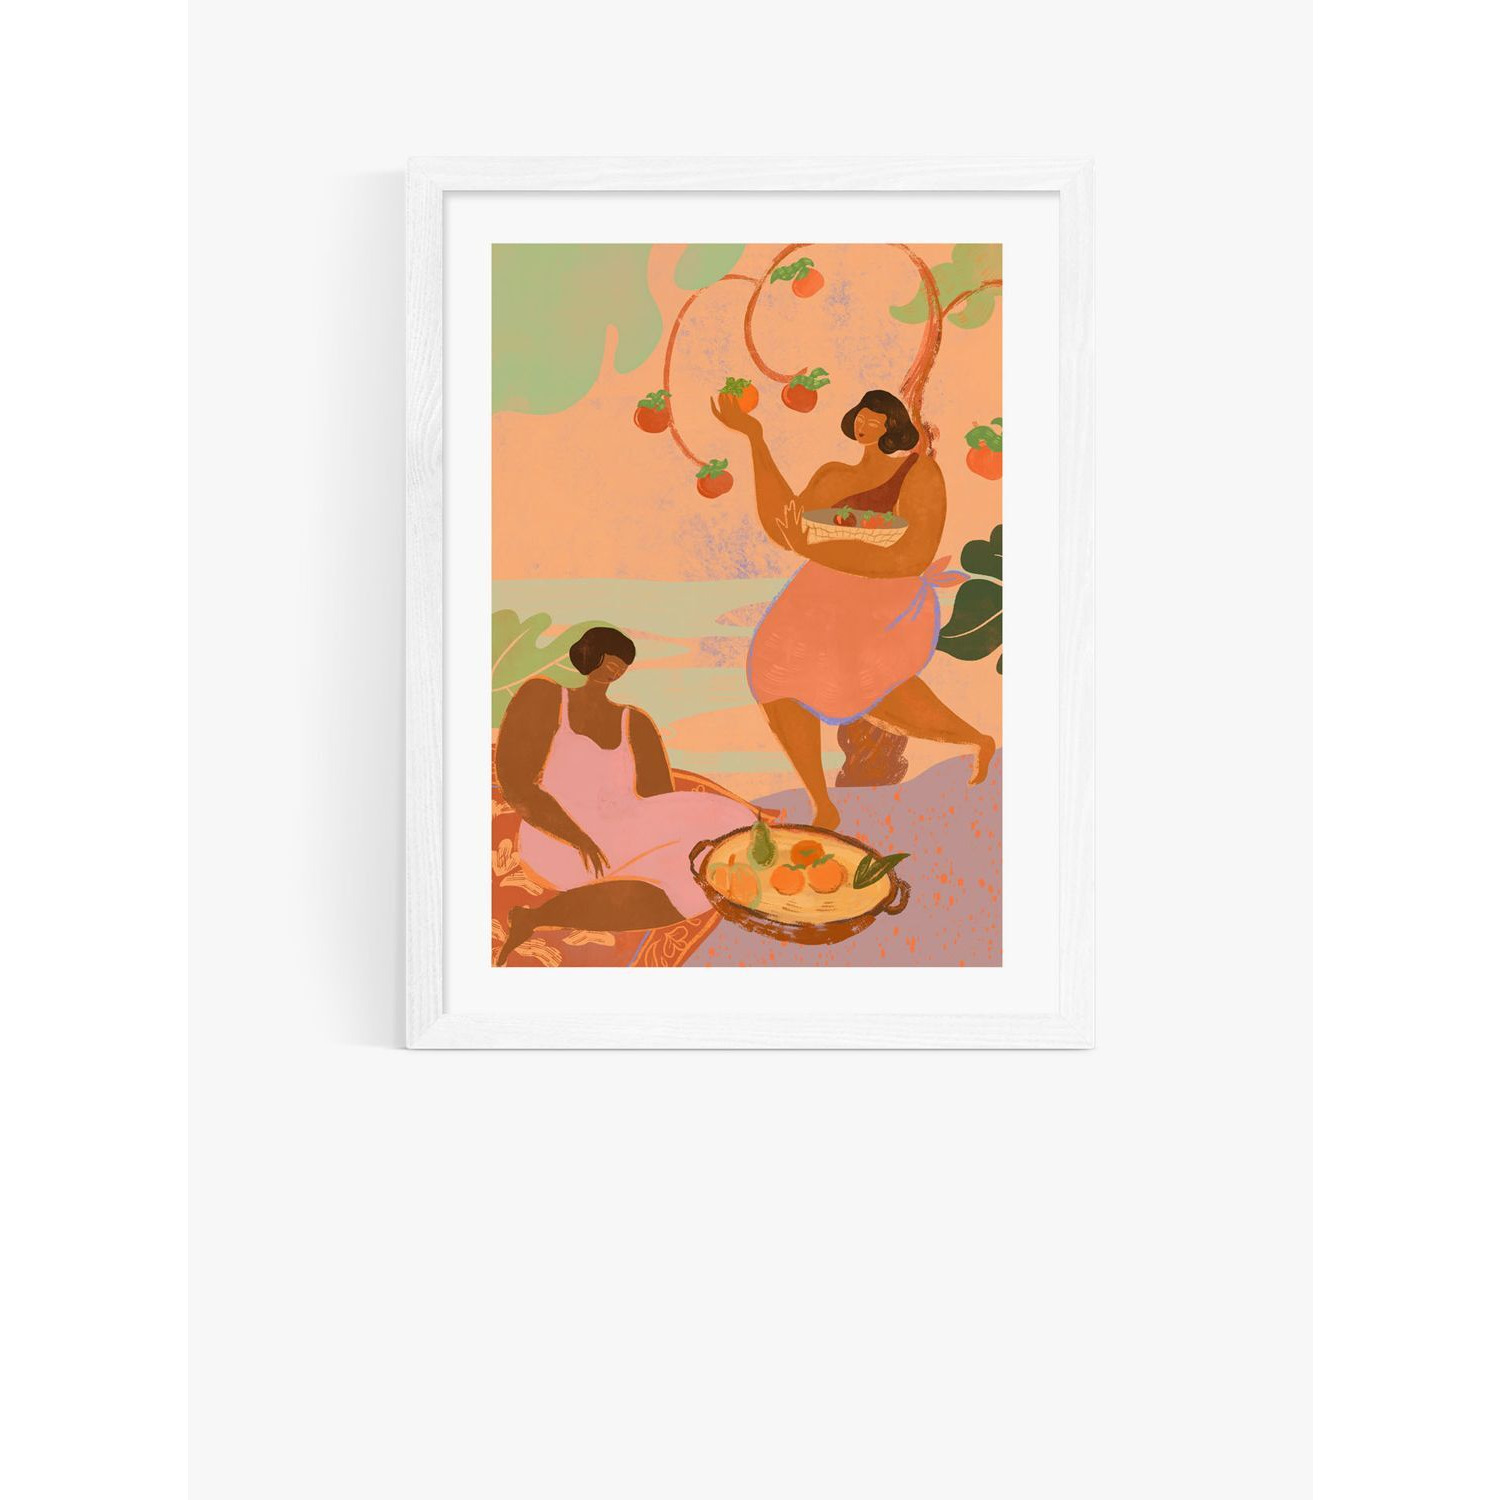 EAST END PRINTS Arty Guava 'Autumn' Framed Print - image 1